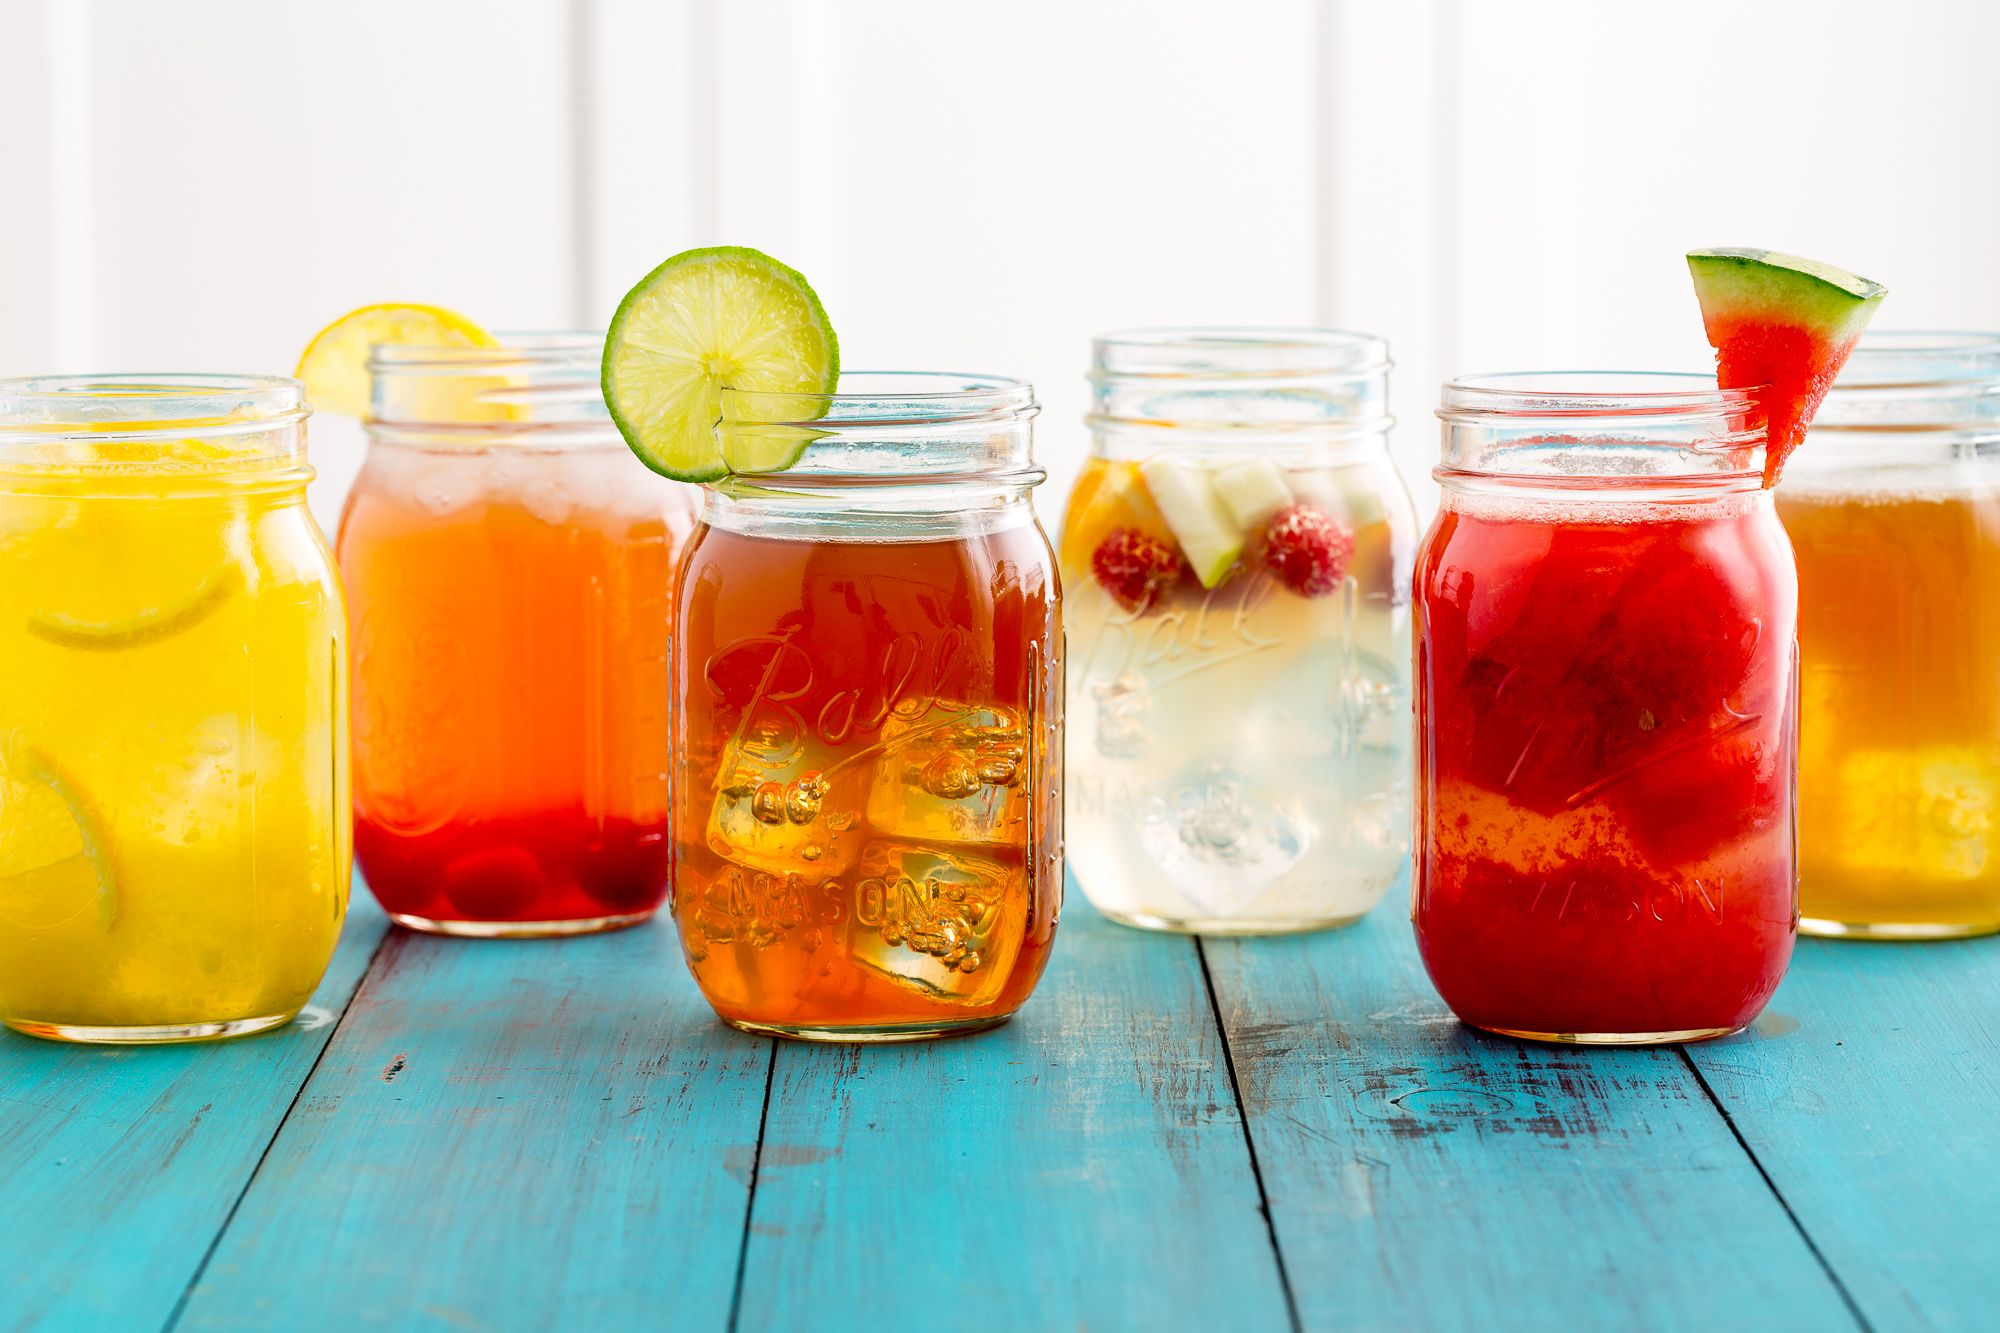 25+ Easy Non Alcoholic Party Drinks - Recipes for Alcohol-Free Summer Drinks